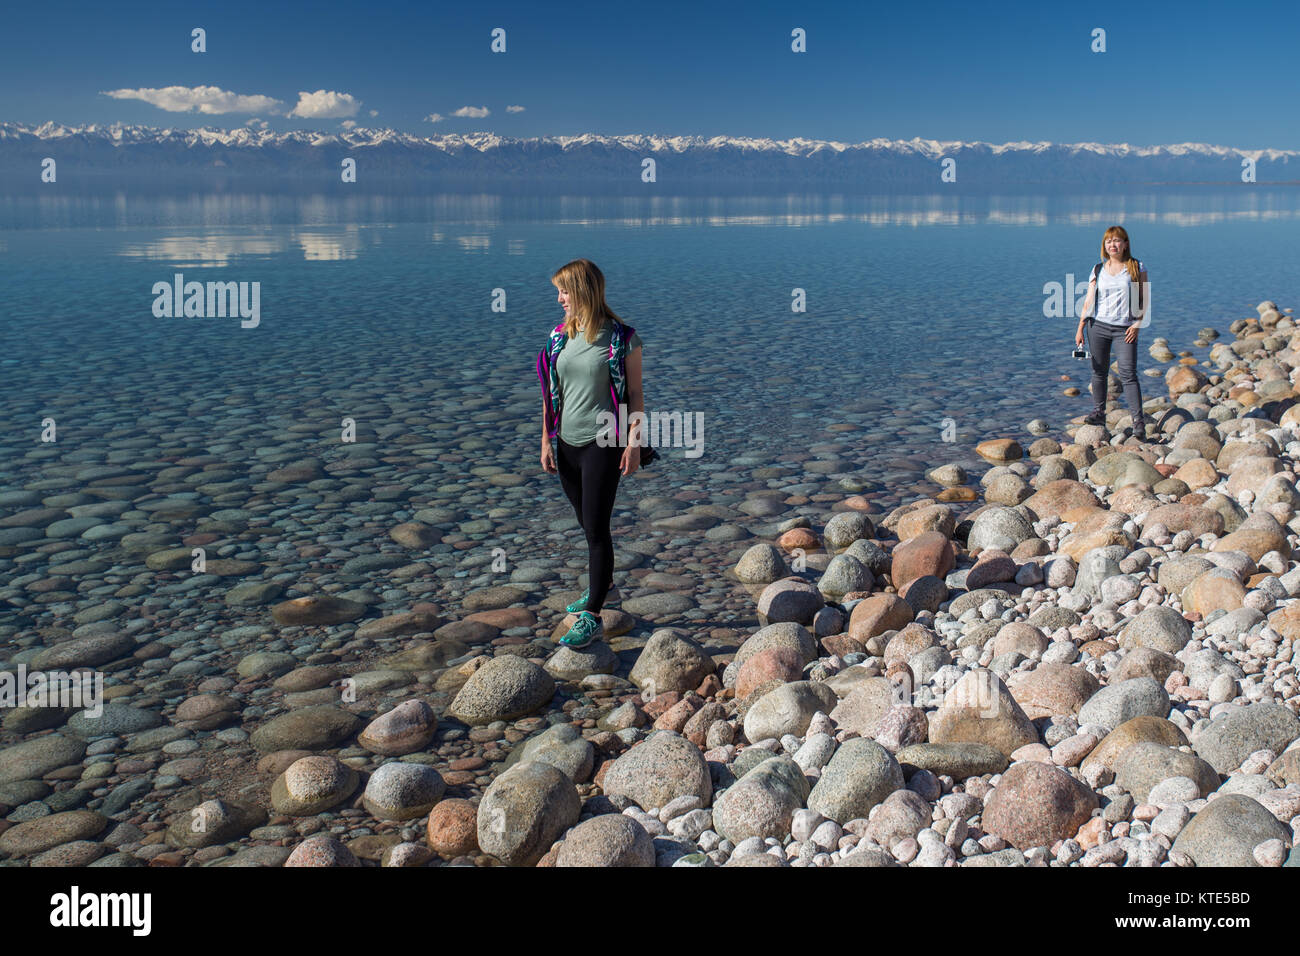 Two mid-20s female tourists walking along the southern shore of Issyk-Kol lake in Kyrgyzstan. Stock Photo